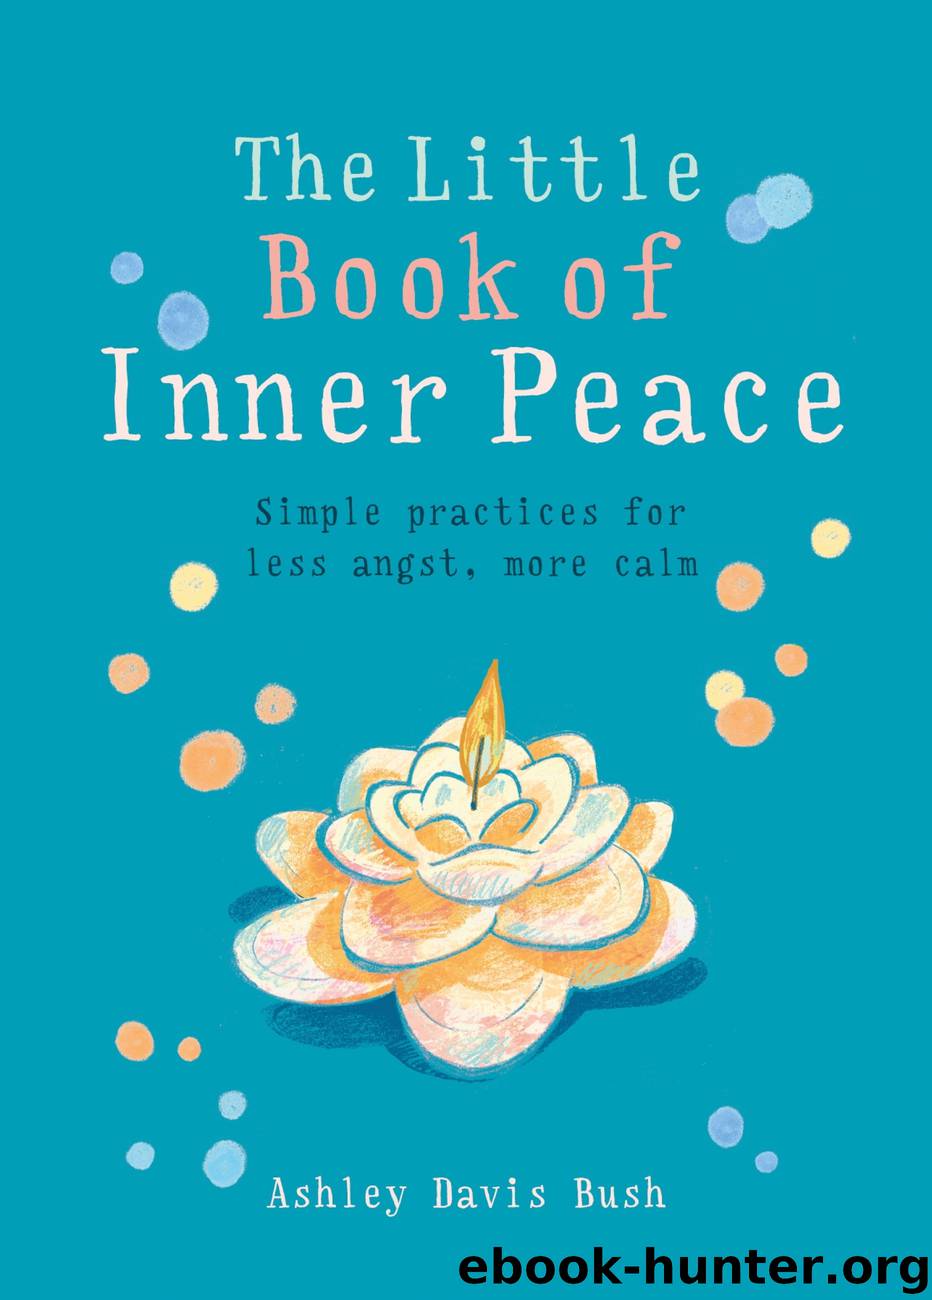 The Little Book of Inner Peace by Author